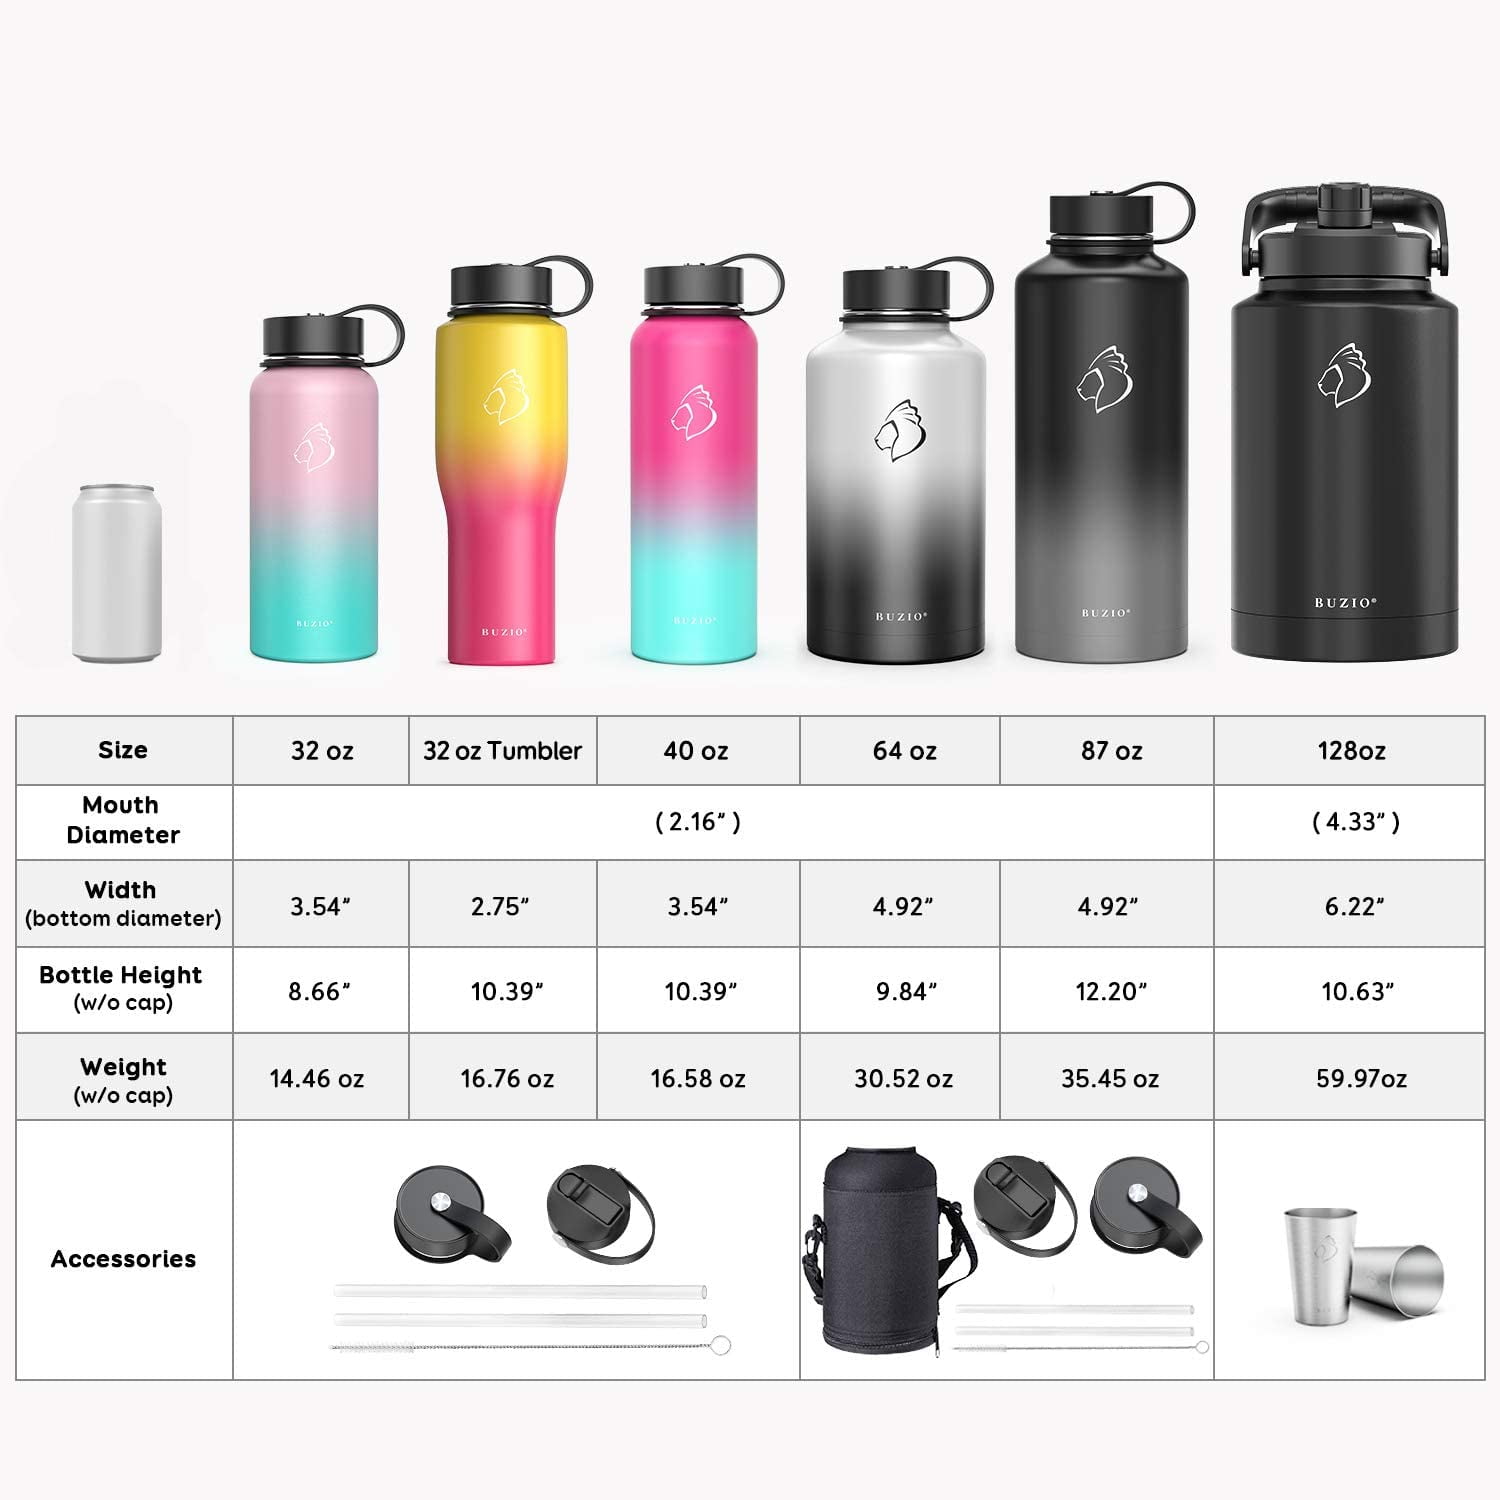 40oz Insulated Water Bottle Fits in Any Car Cup Holders, BUZIO 40oz Vacuum  Insulated Tumbler with Lids and Straw for Water, Travel Mug Cupholder